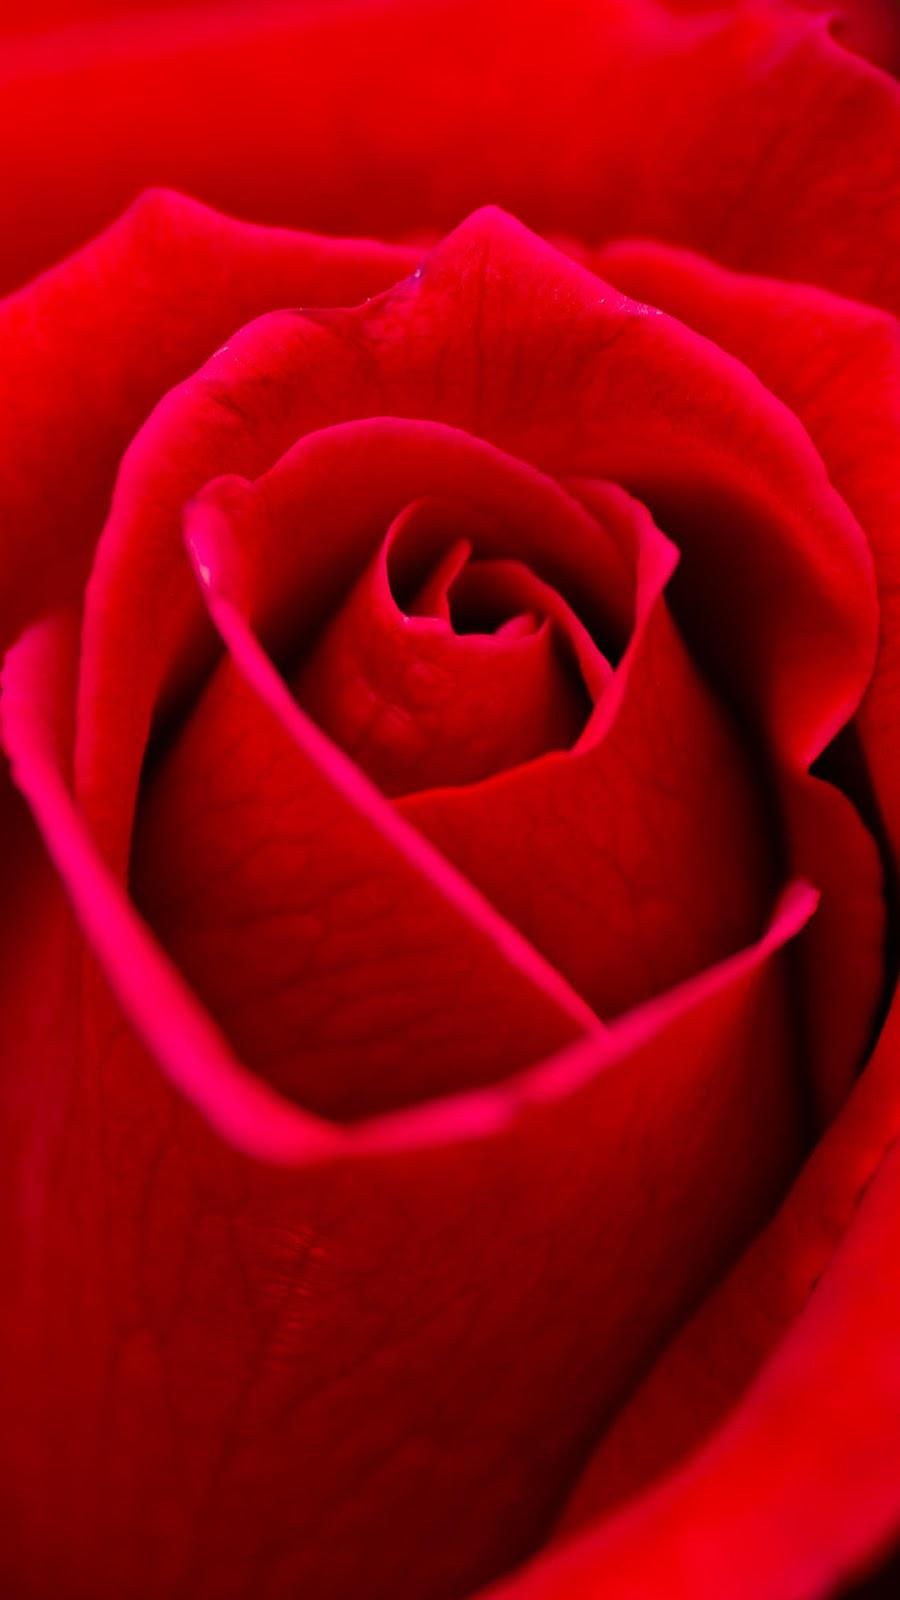 Red Roses Flowers iPhone Wallpaper HD download free